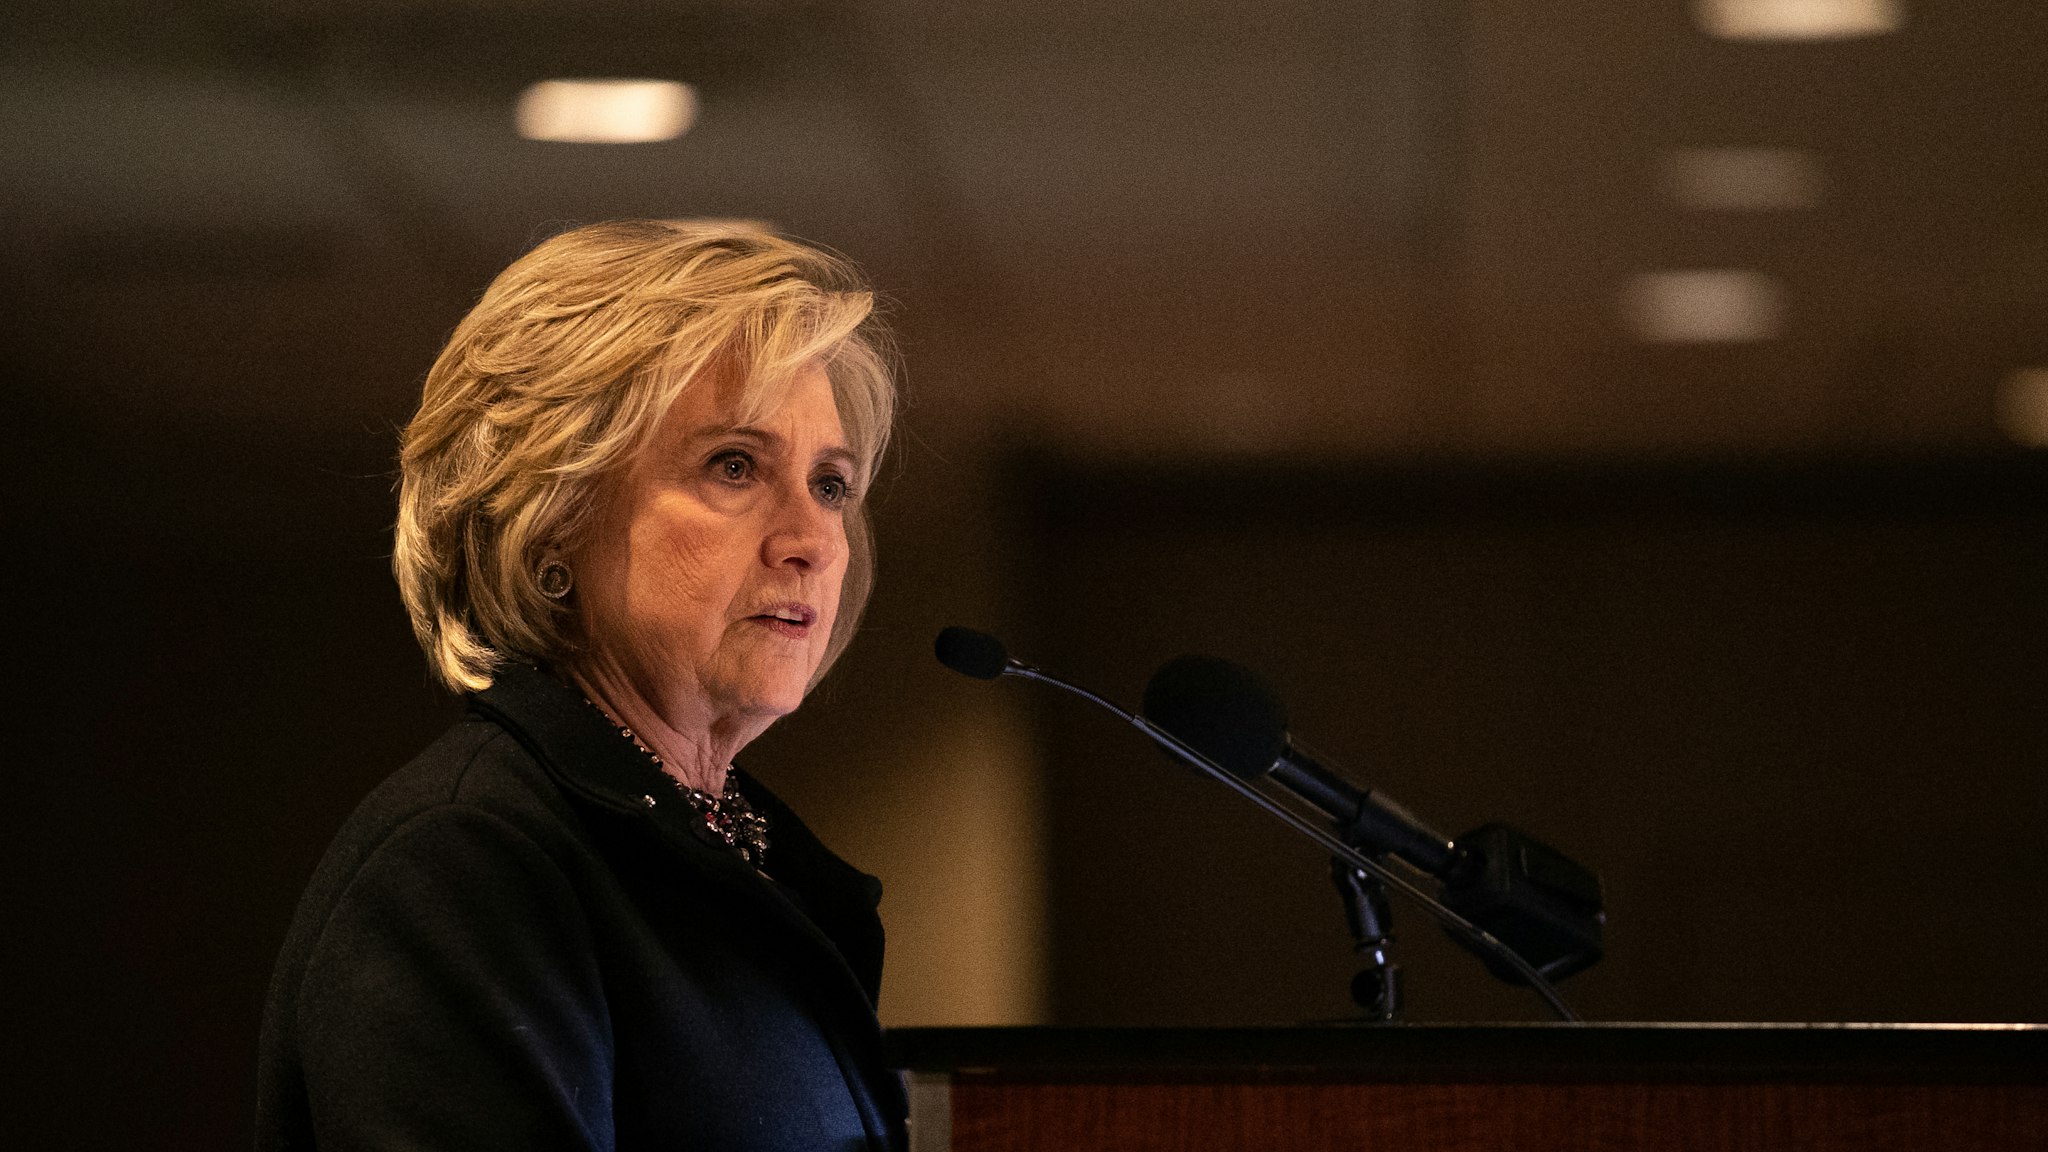 NEW YORK, NY - DECEMBER 09: Hillary Clinton speaks at the Jewish Labor Committee's Annual Human Rights Awards Dinner on December 9, 2019 in New York City. (Photo by Jeenah Moon/Getty Images)